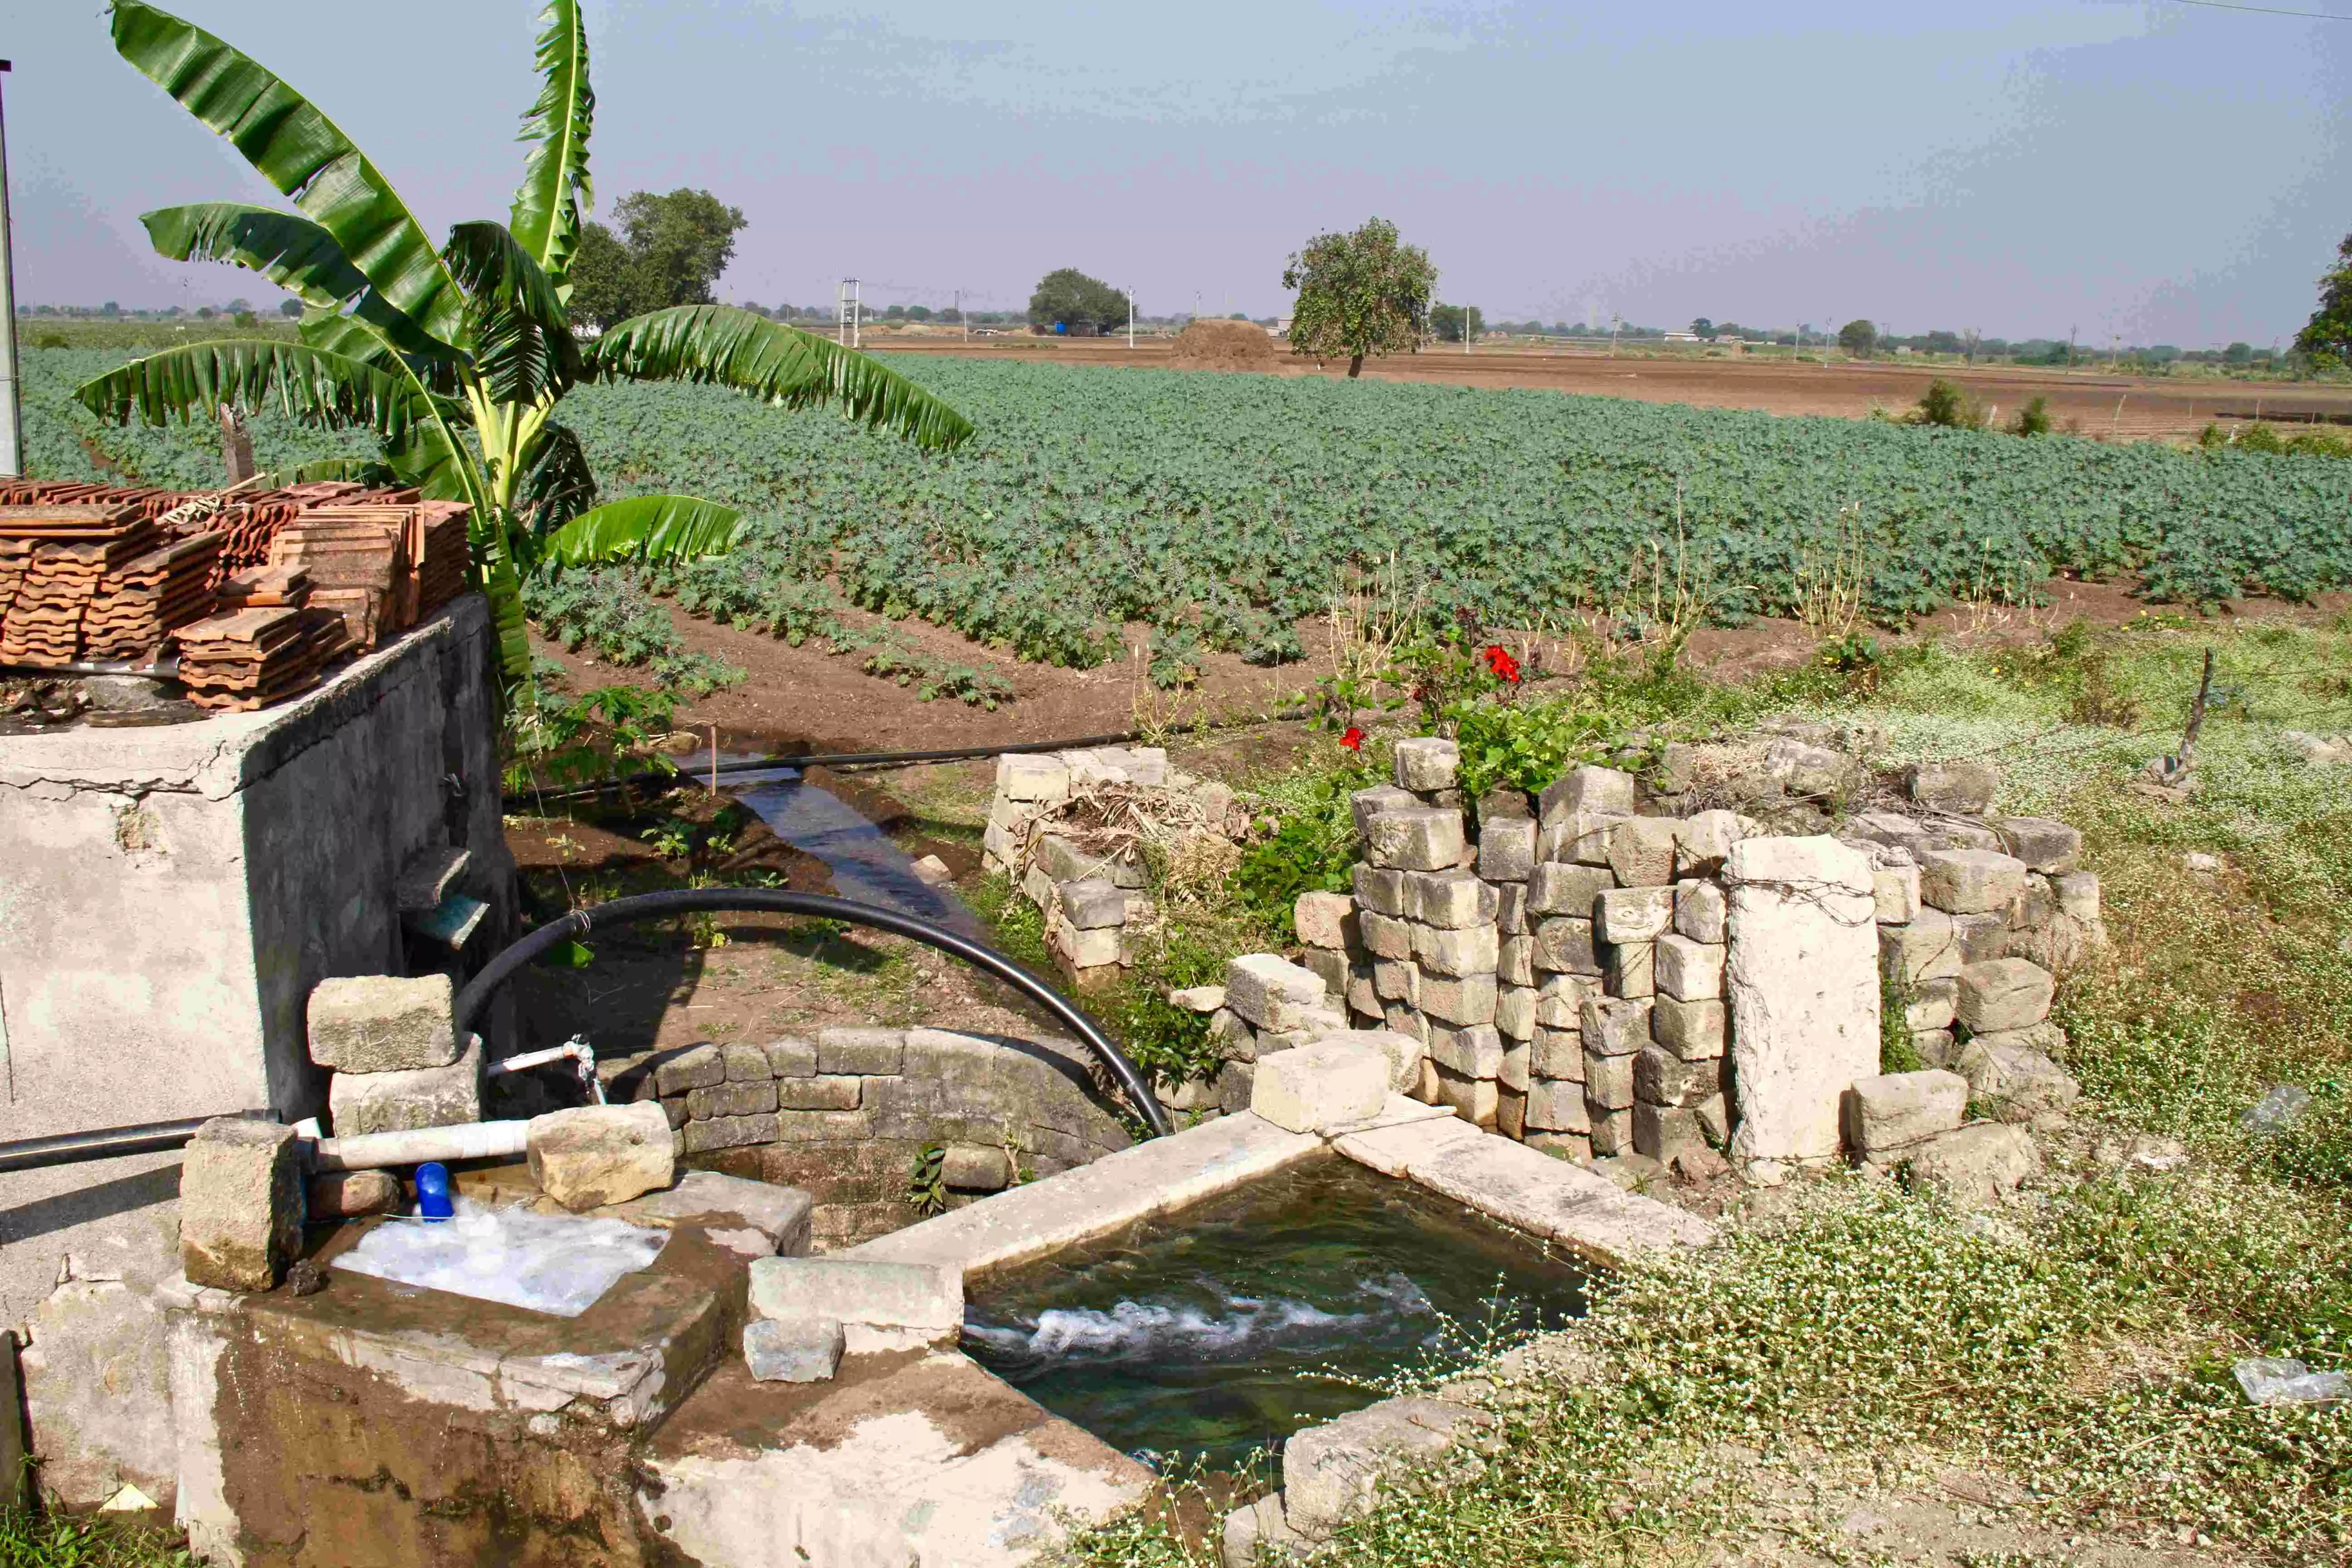 India Consumes A Quarter Of The Groundwater Extracted Globally: CSE Report